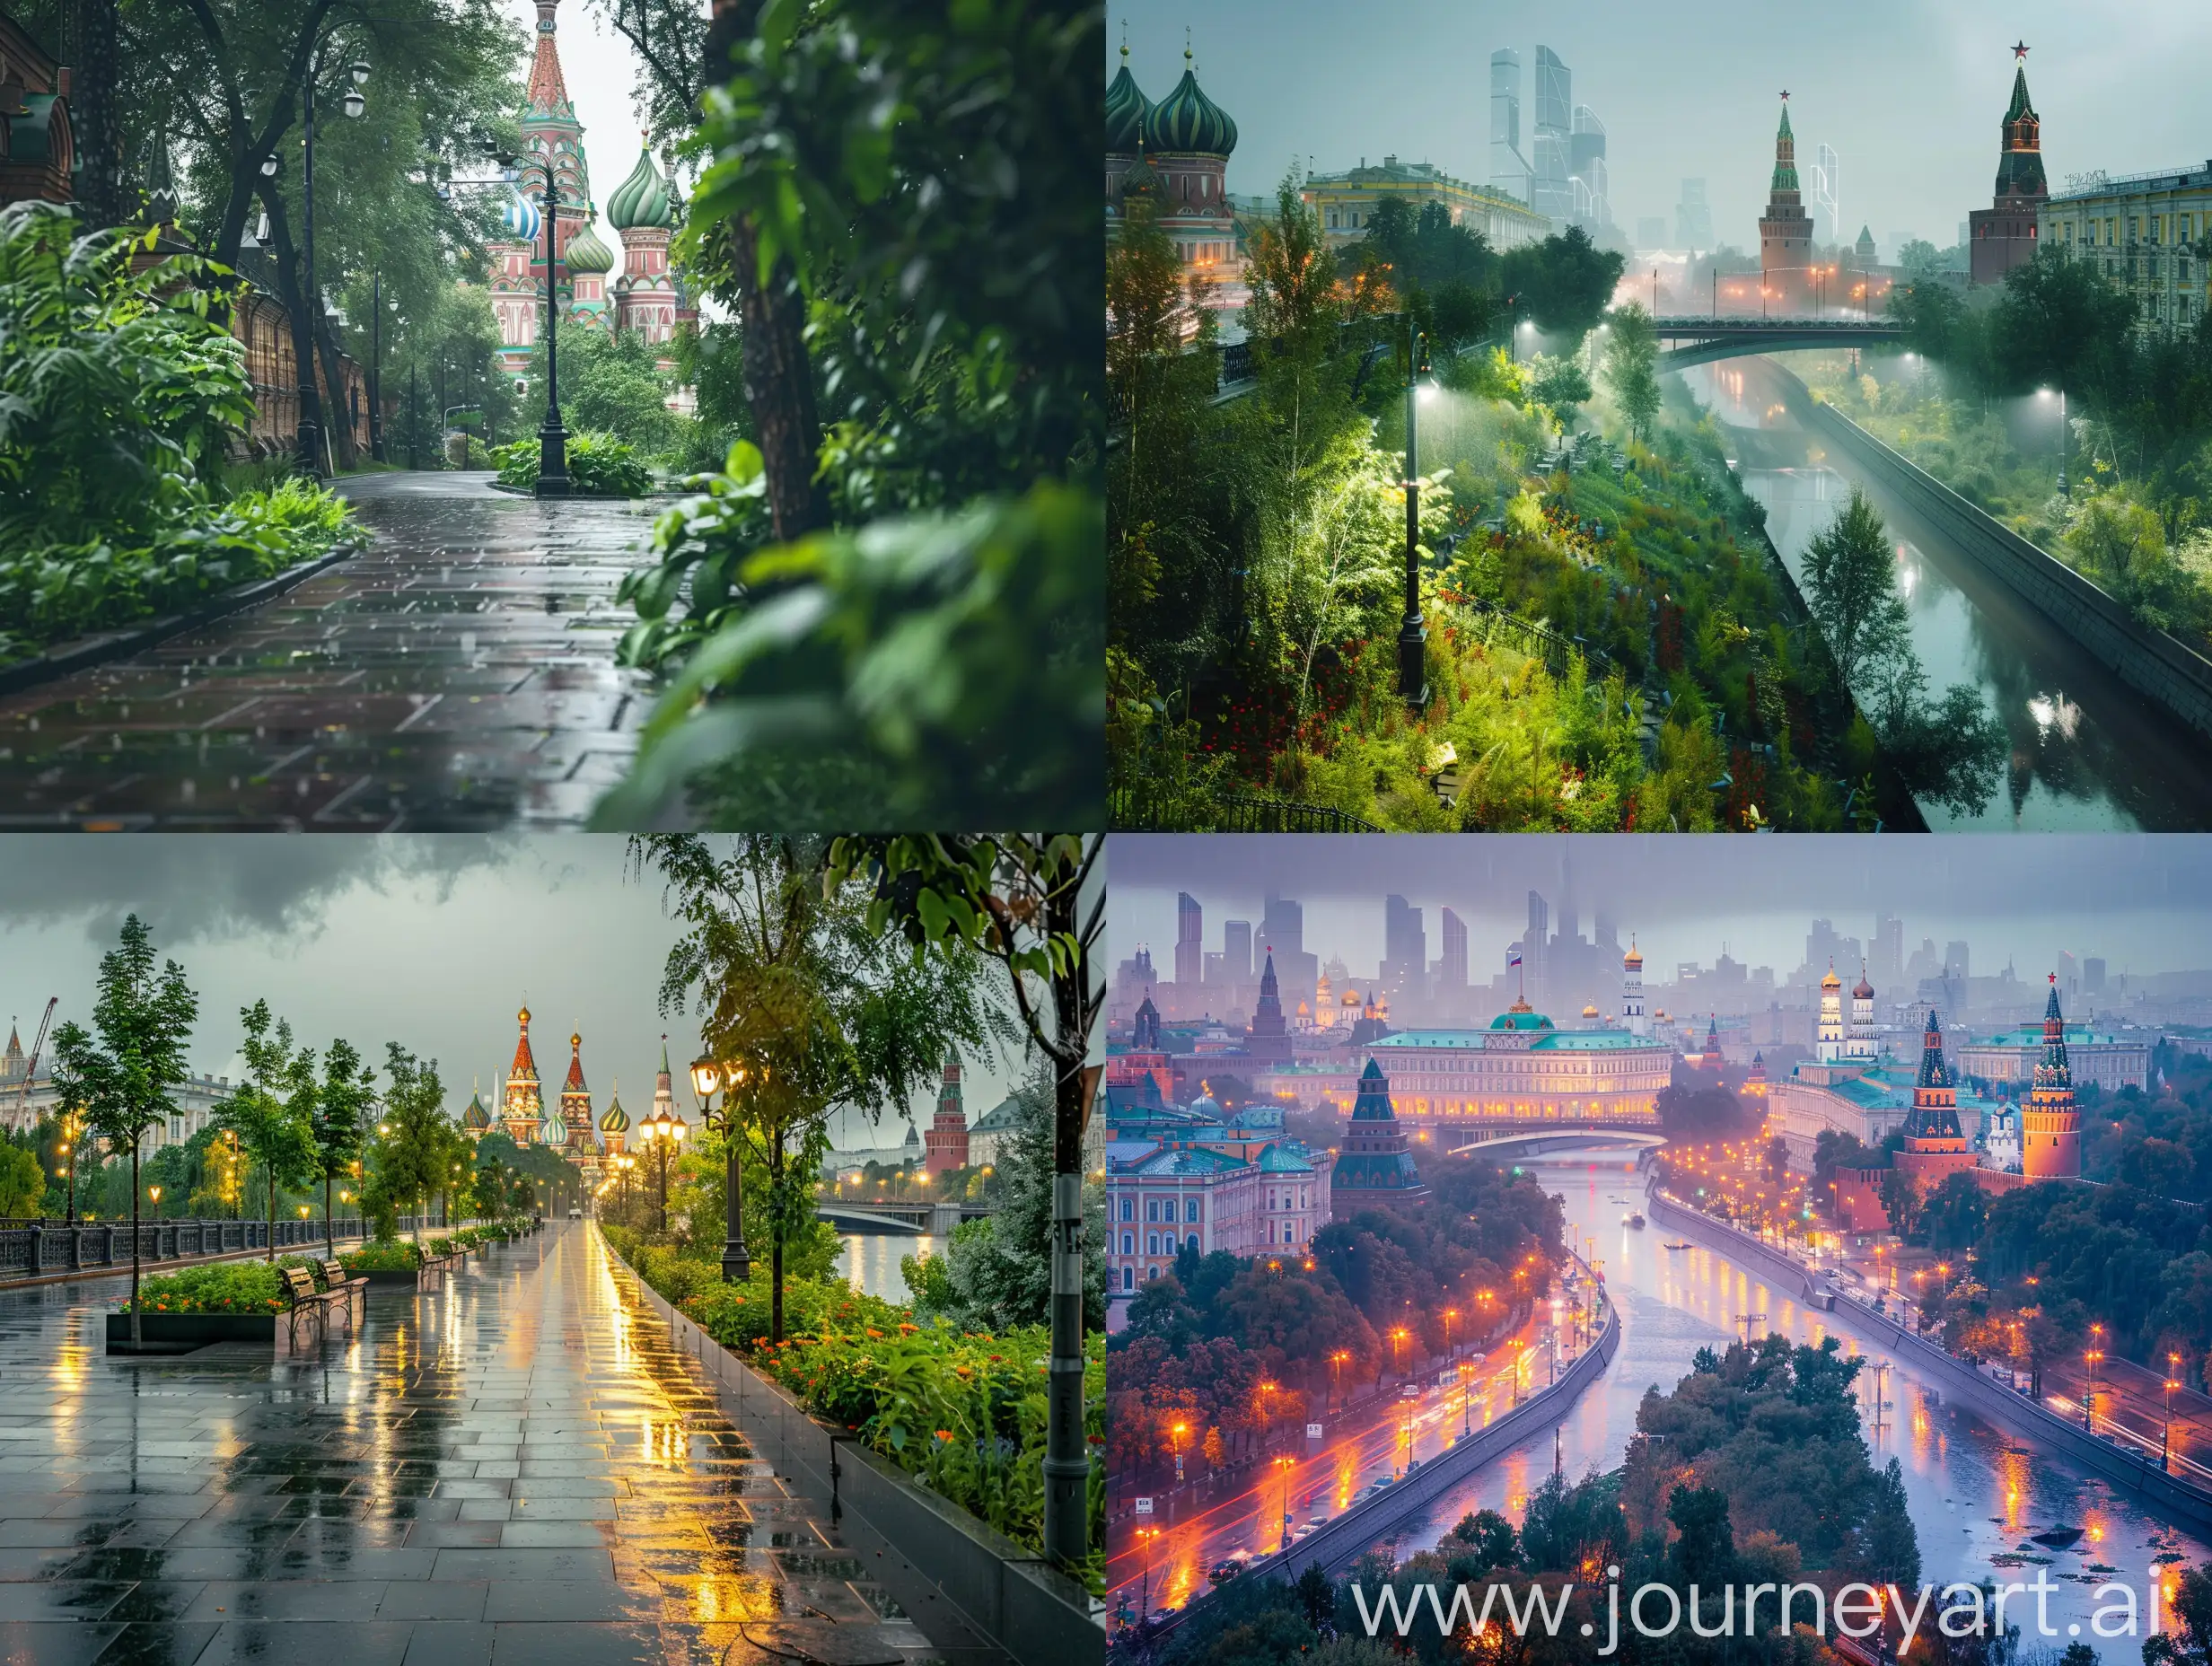 Rainy-Day-Stroll-in-Moscow-City-Amid-Lush-Ecosystem